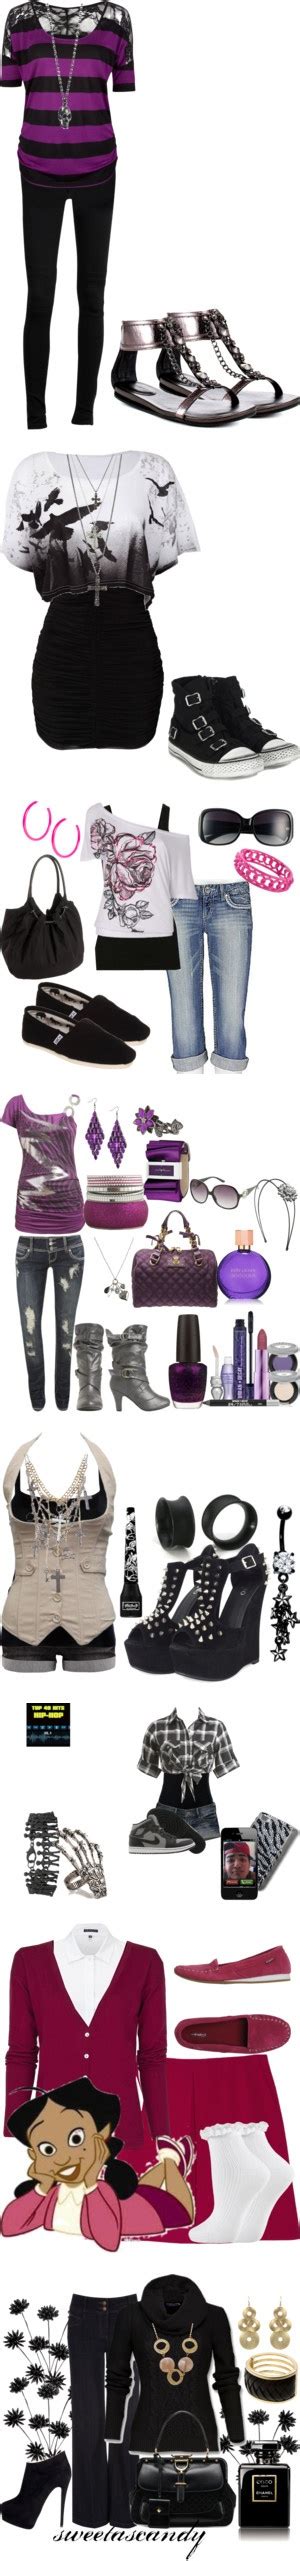 Rockin By Karlibugg On Polyvore Fashion Winter Fashion Colourful Outfits